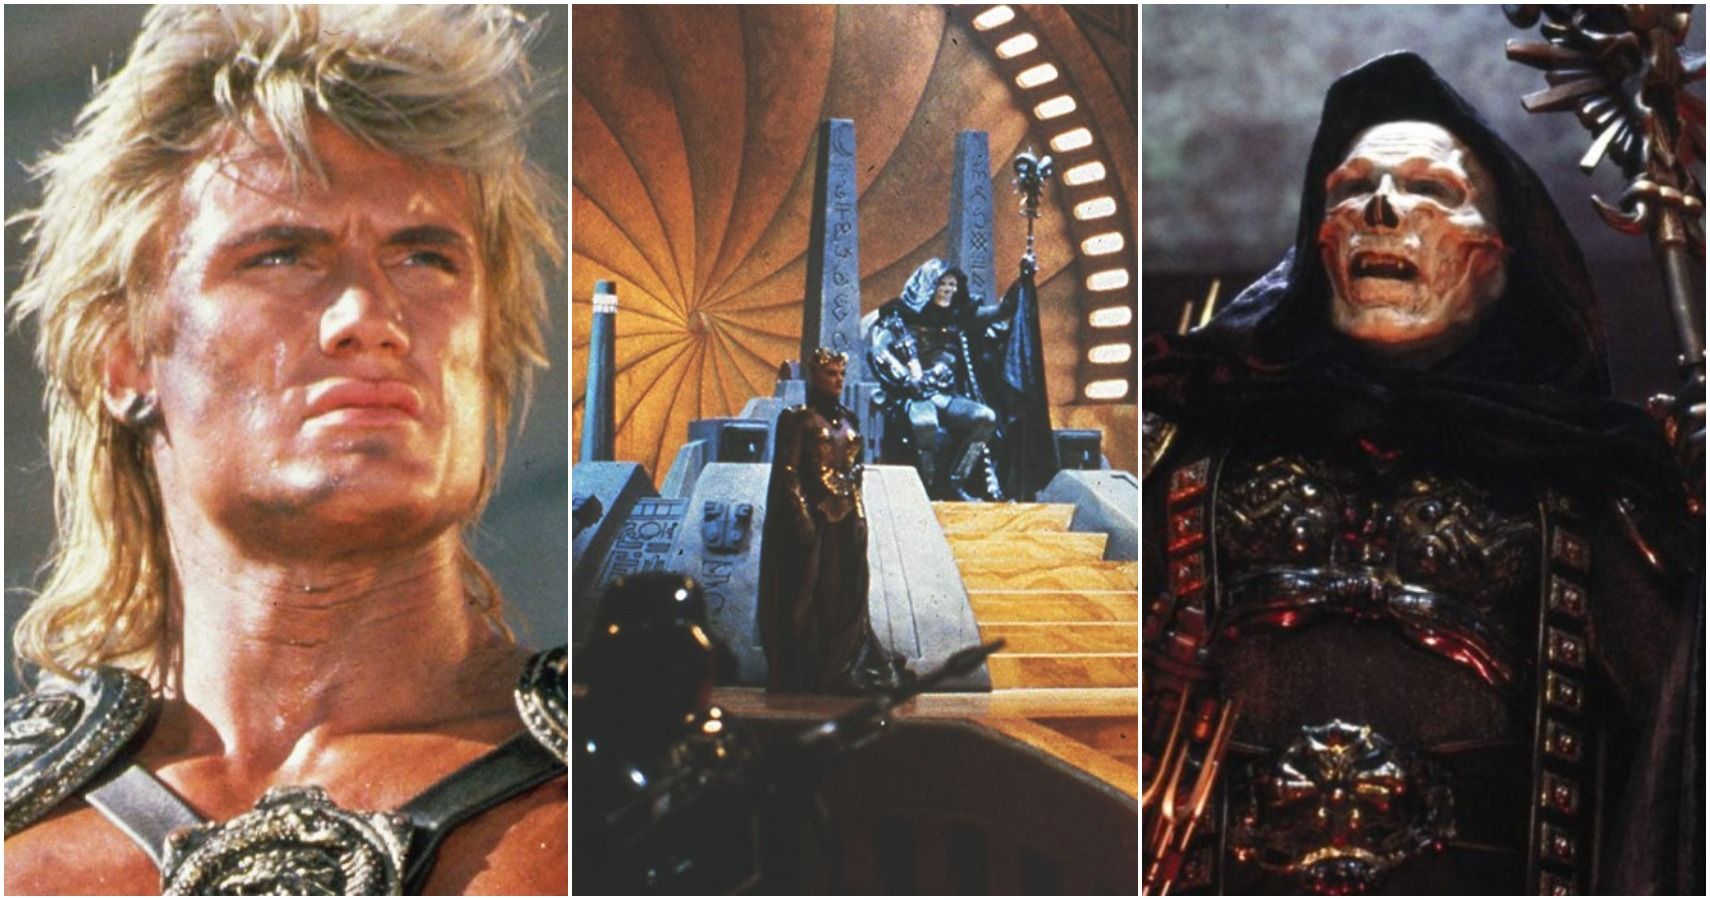 5 Reasons Why the Masters of the Universe Movie is a Great Adaptation (& 5 Reasons Why it Isn’t)